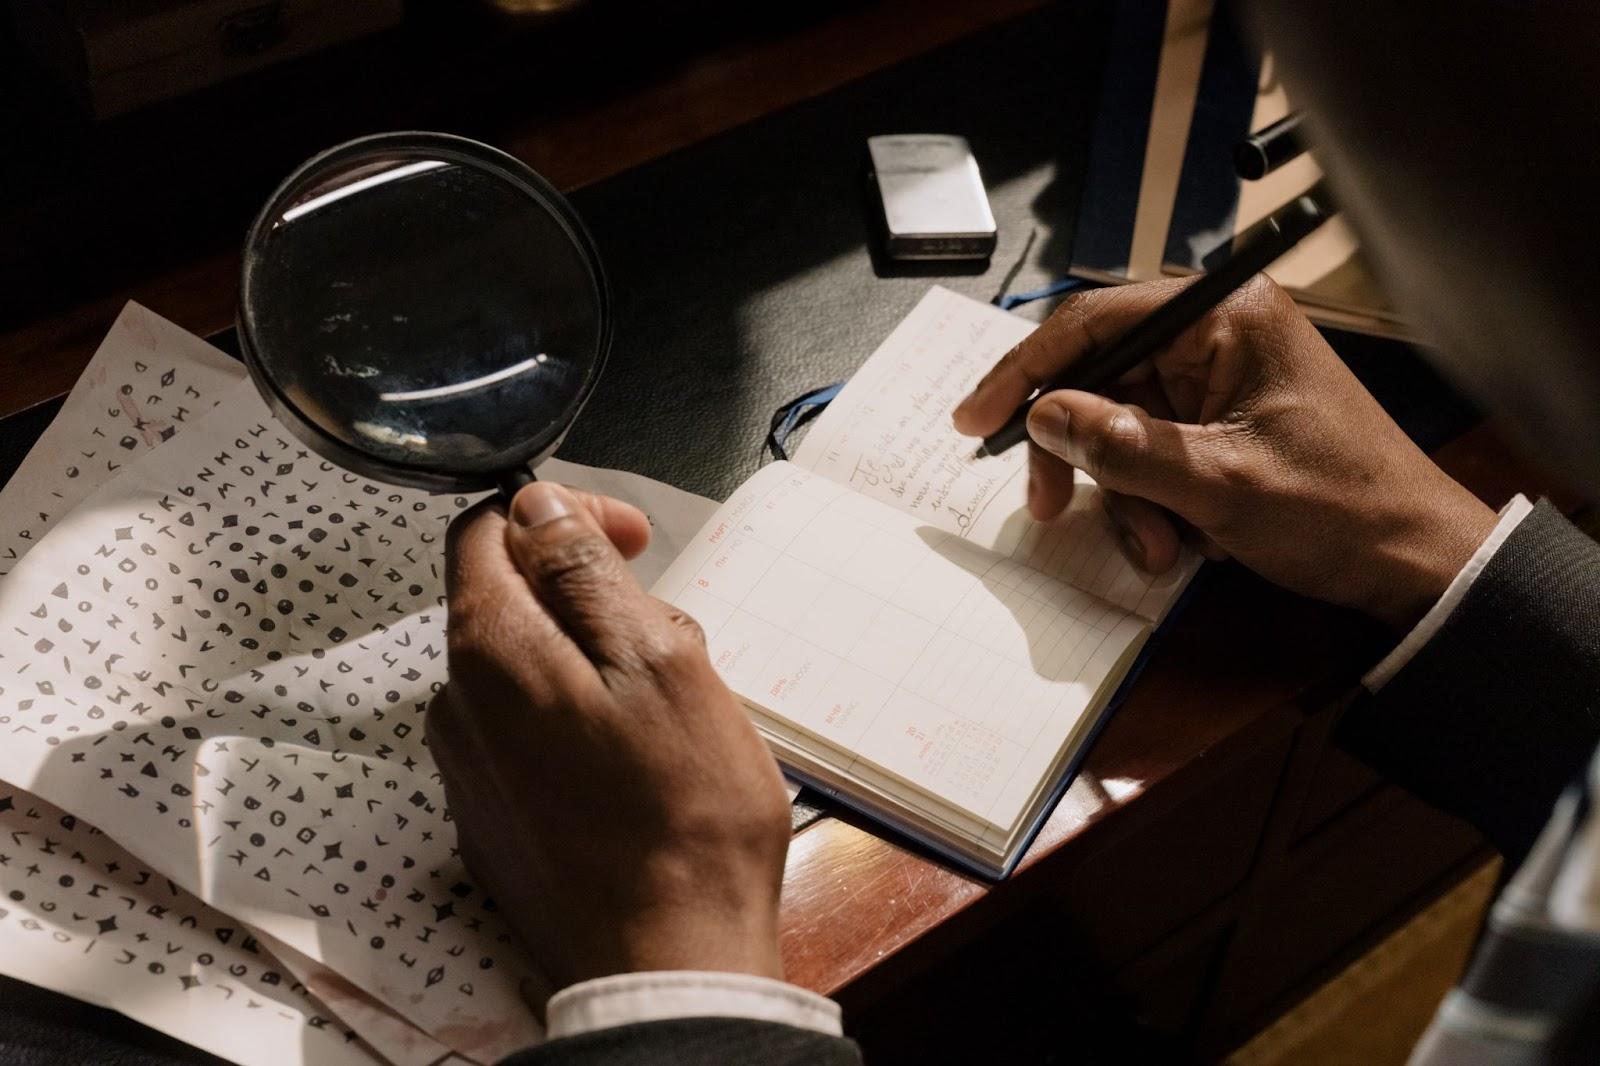 Man Holding Magnifing Glass and Writing in Small Journal